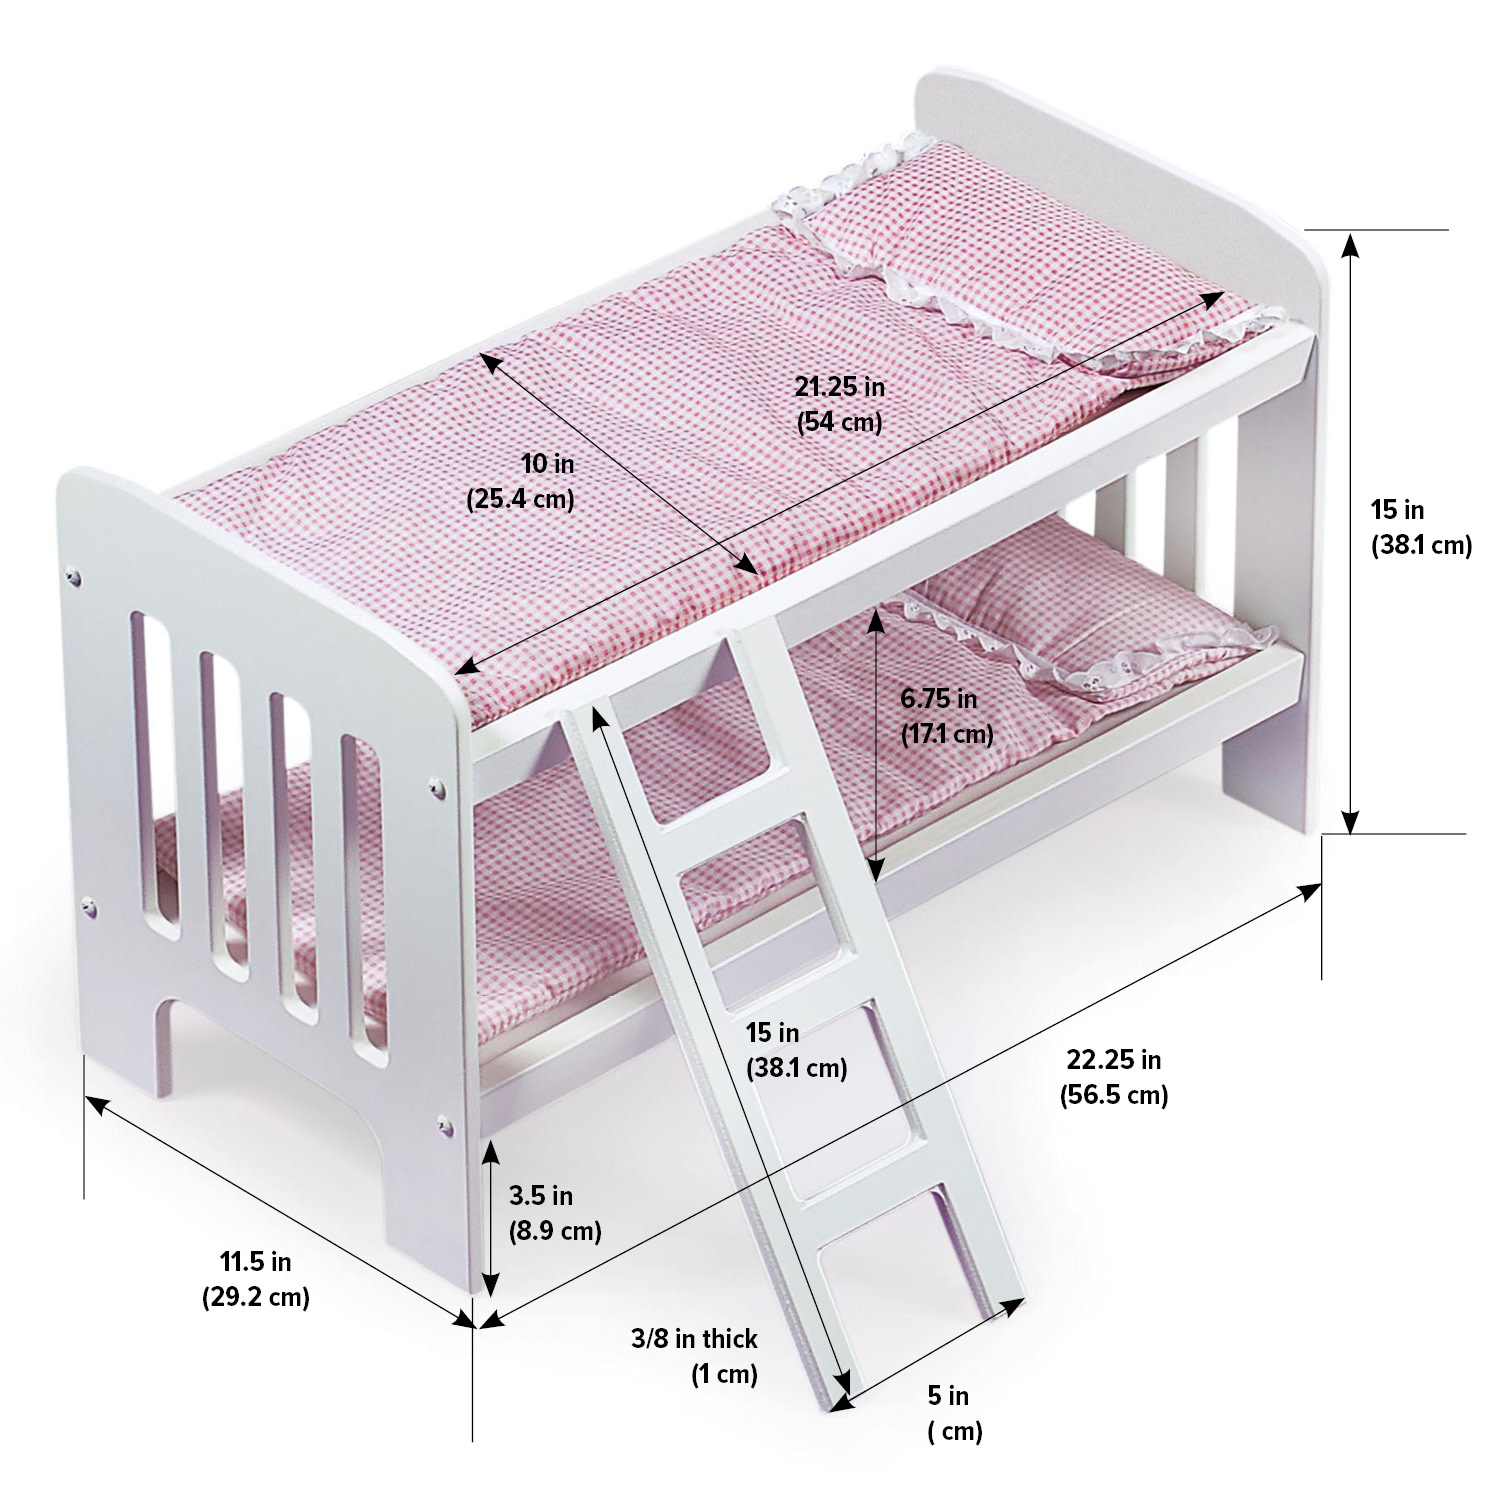 Badger Basket Doll Bunk Bed with Bedding, Ladder, and Free Personalization Kit - White/Pink/Gingham - image 4 of 11